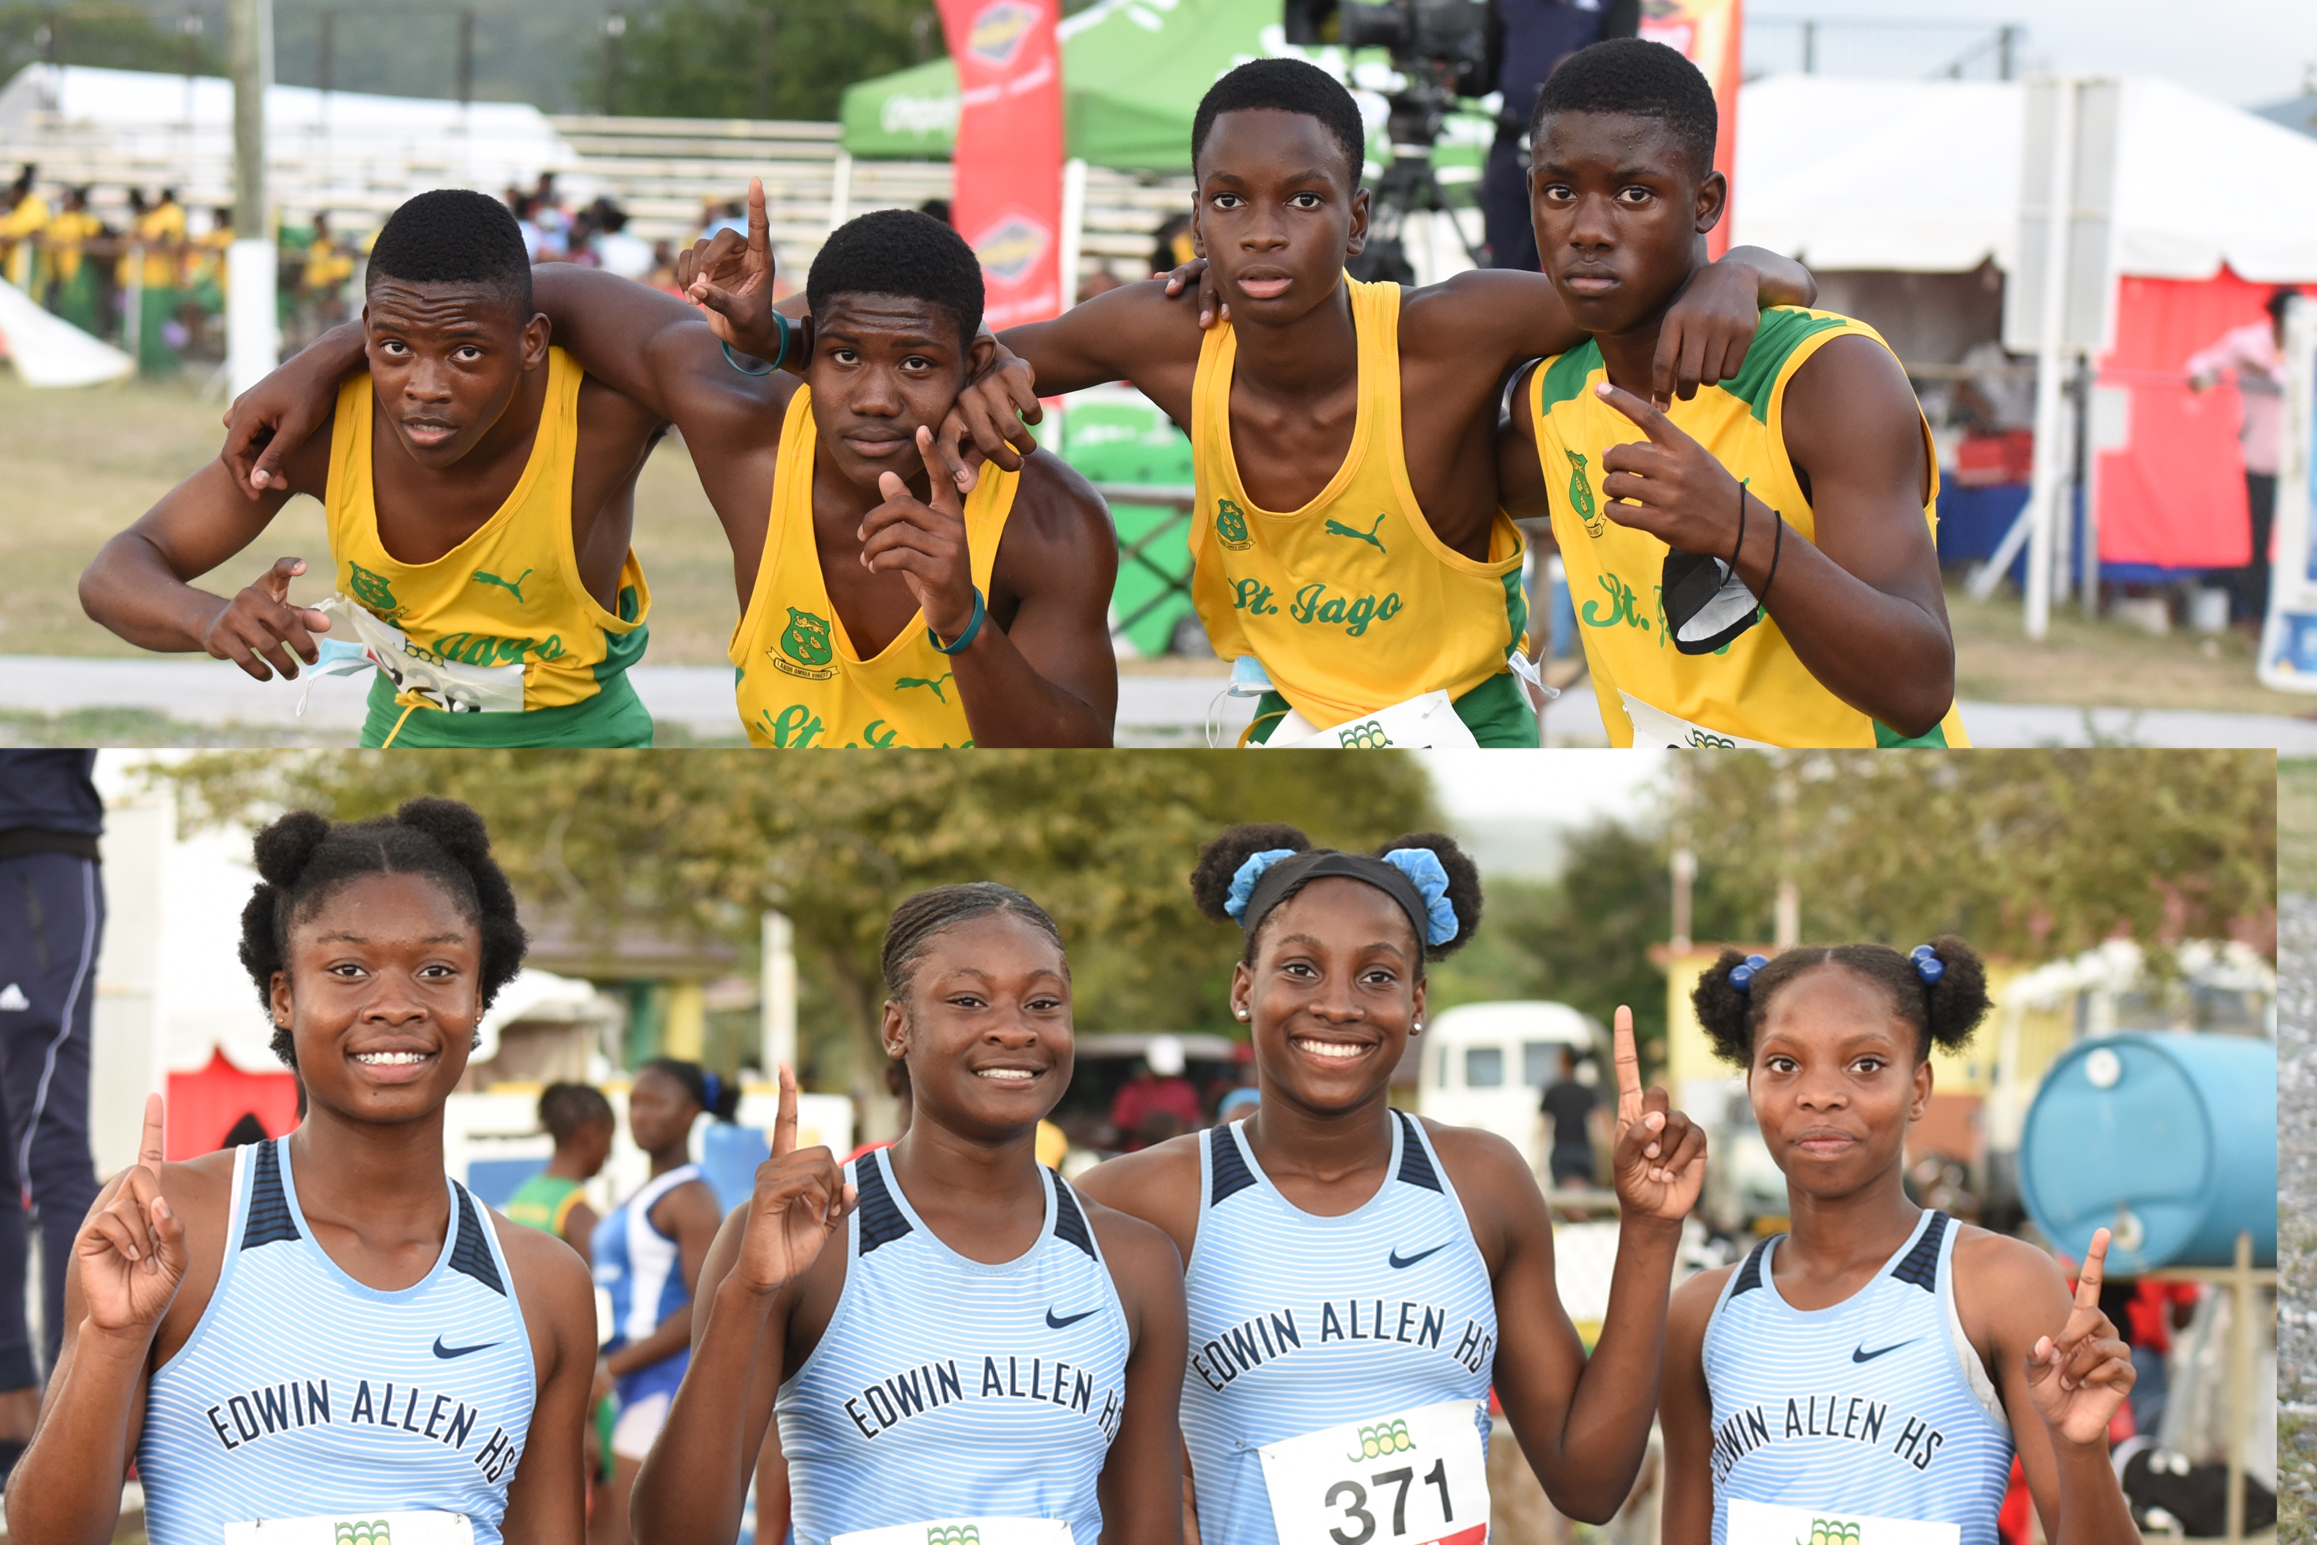 St. Jago and Edwin Allen retained their Central Champs titles